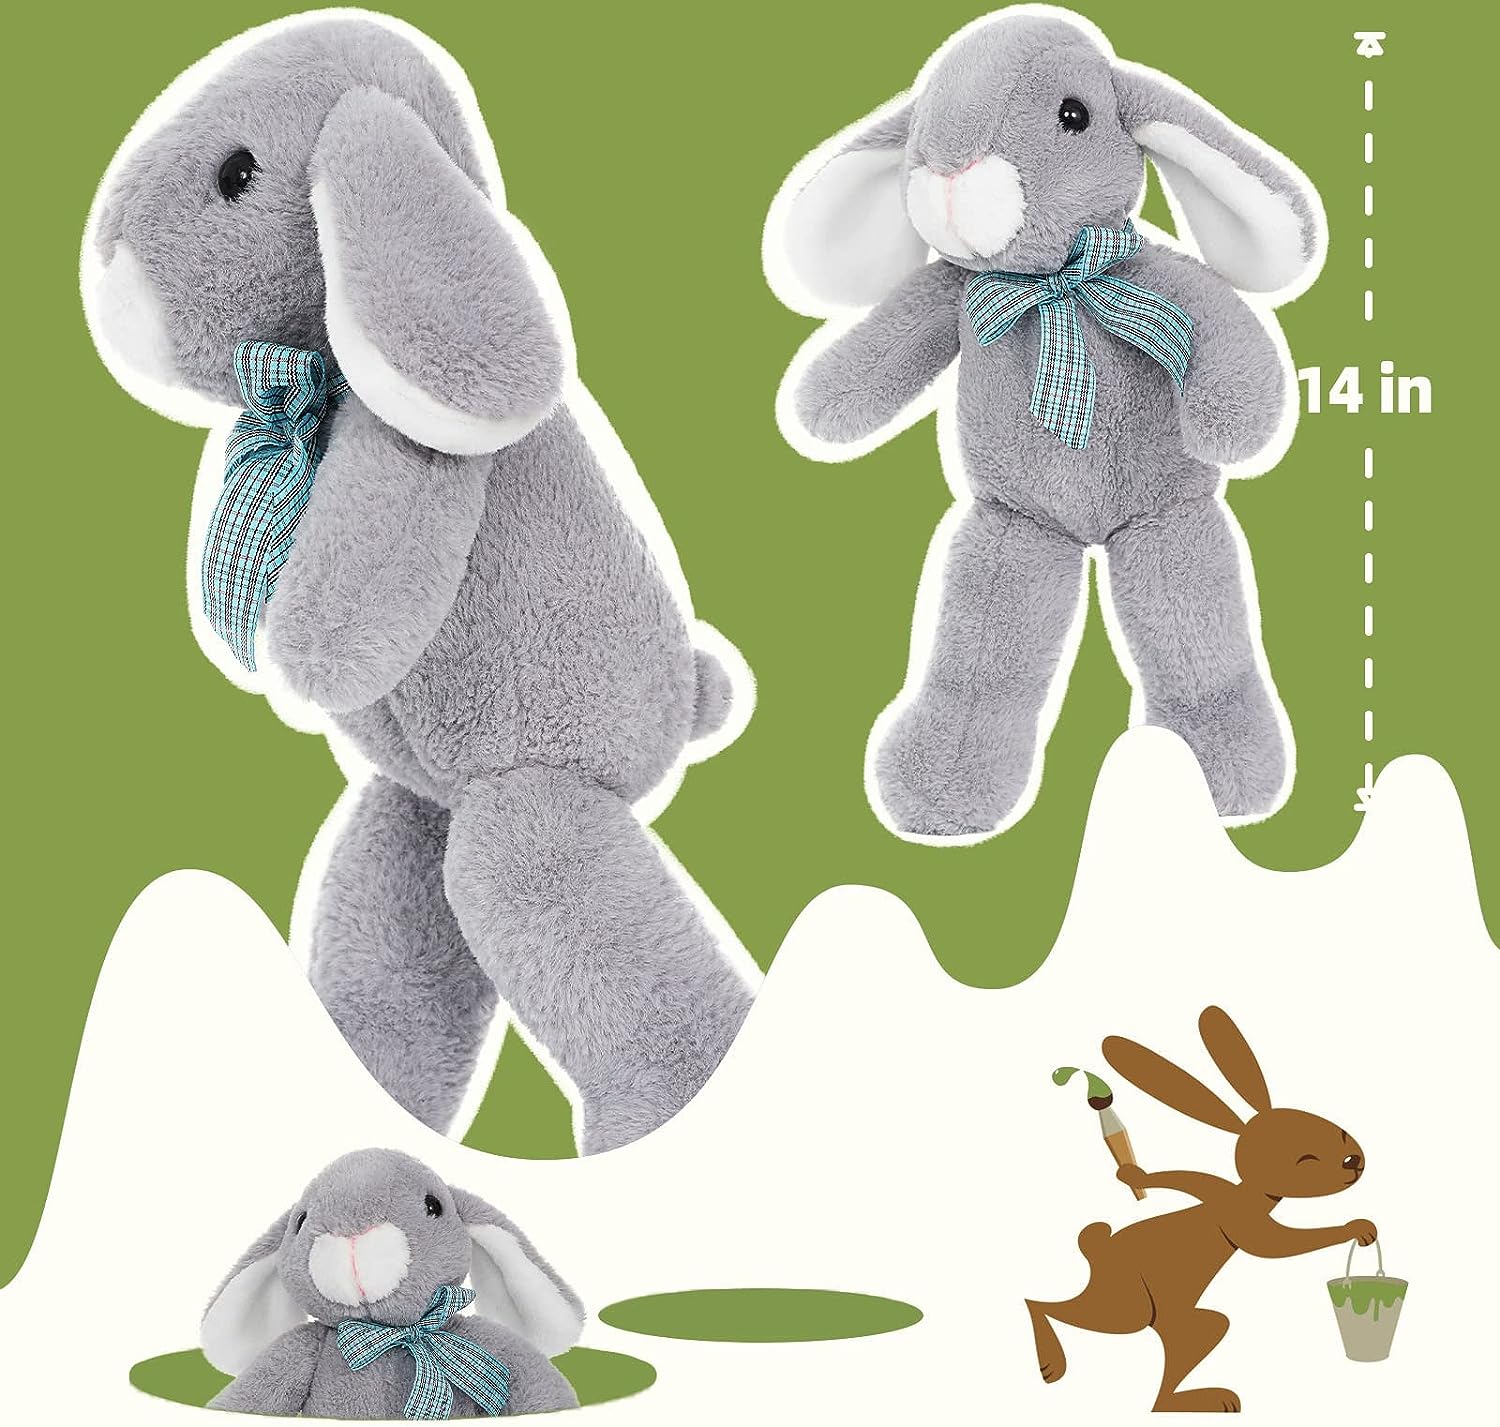 3 Pack Bunny Stuffed Animal Toy Set, 14 Inches